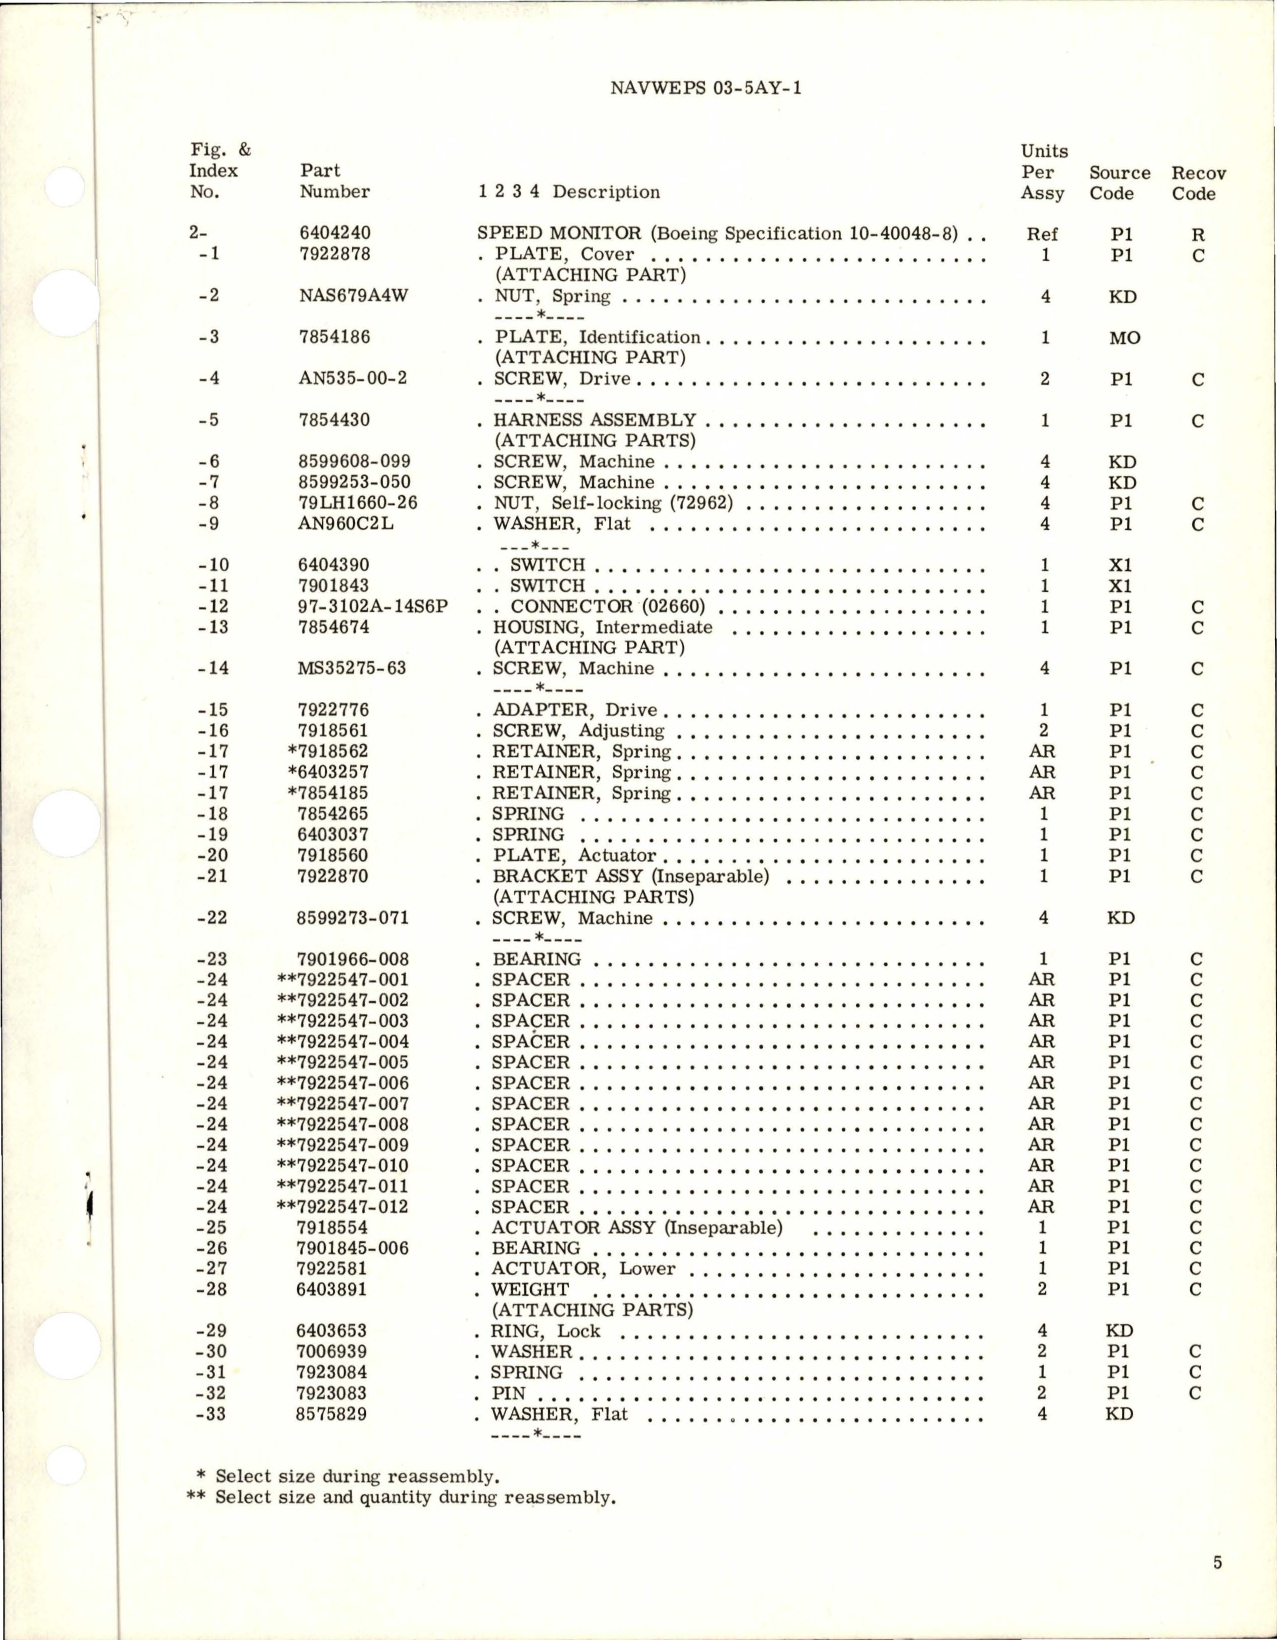 Sample page 5 from AirCorps Library document: Overhaul with Parts Breakdown for Speed Monitor - 6404240